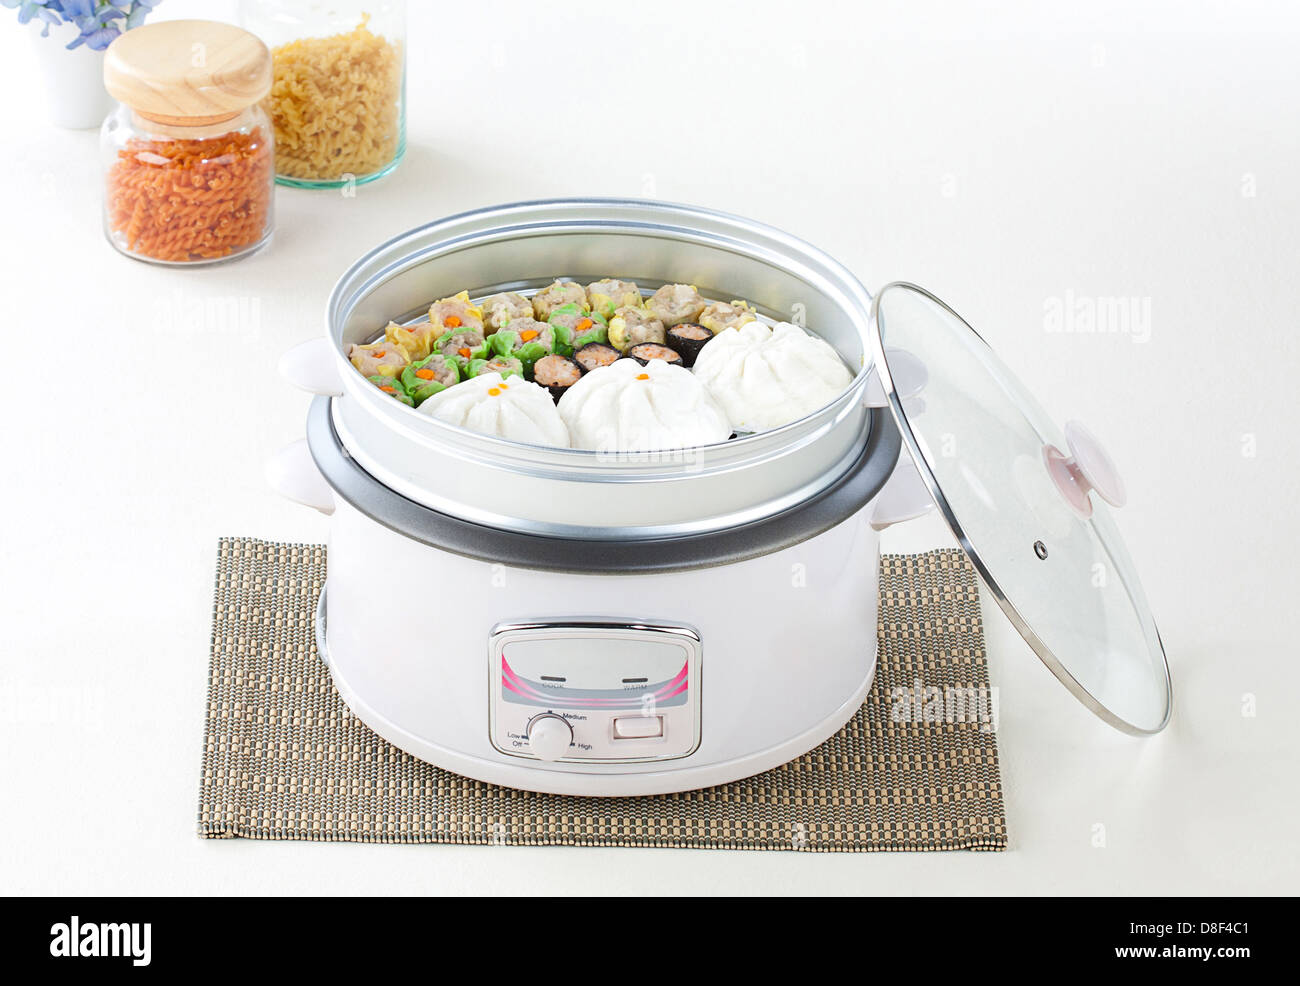 Electric rice cooker and tray for steaming food Stock Photo